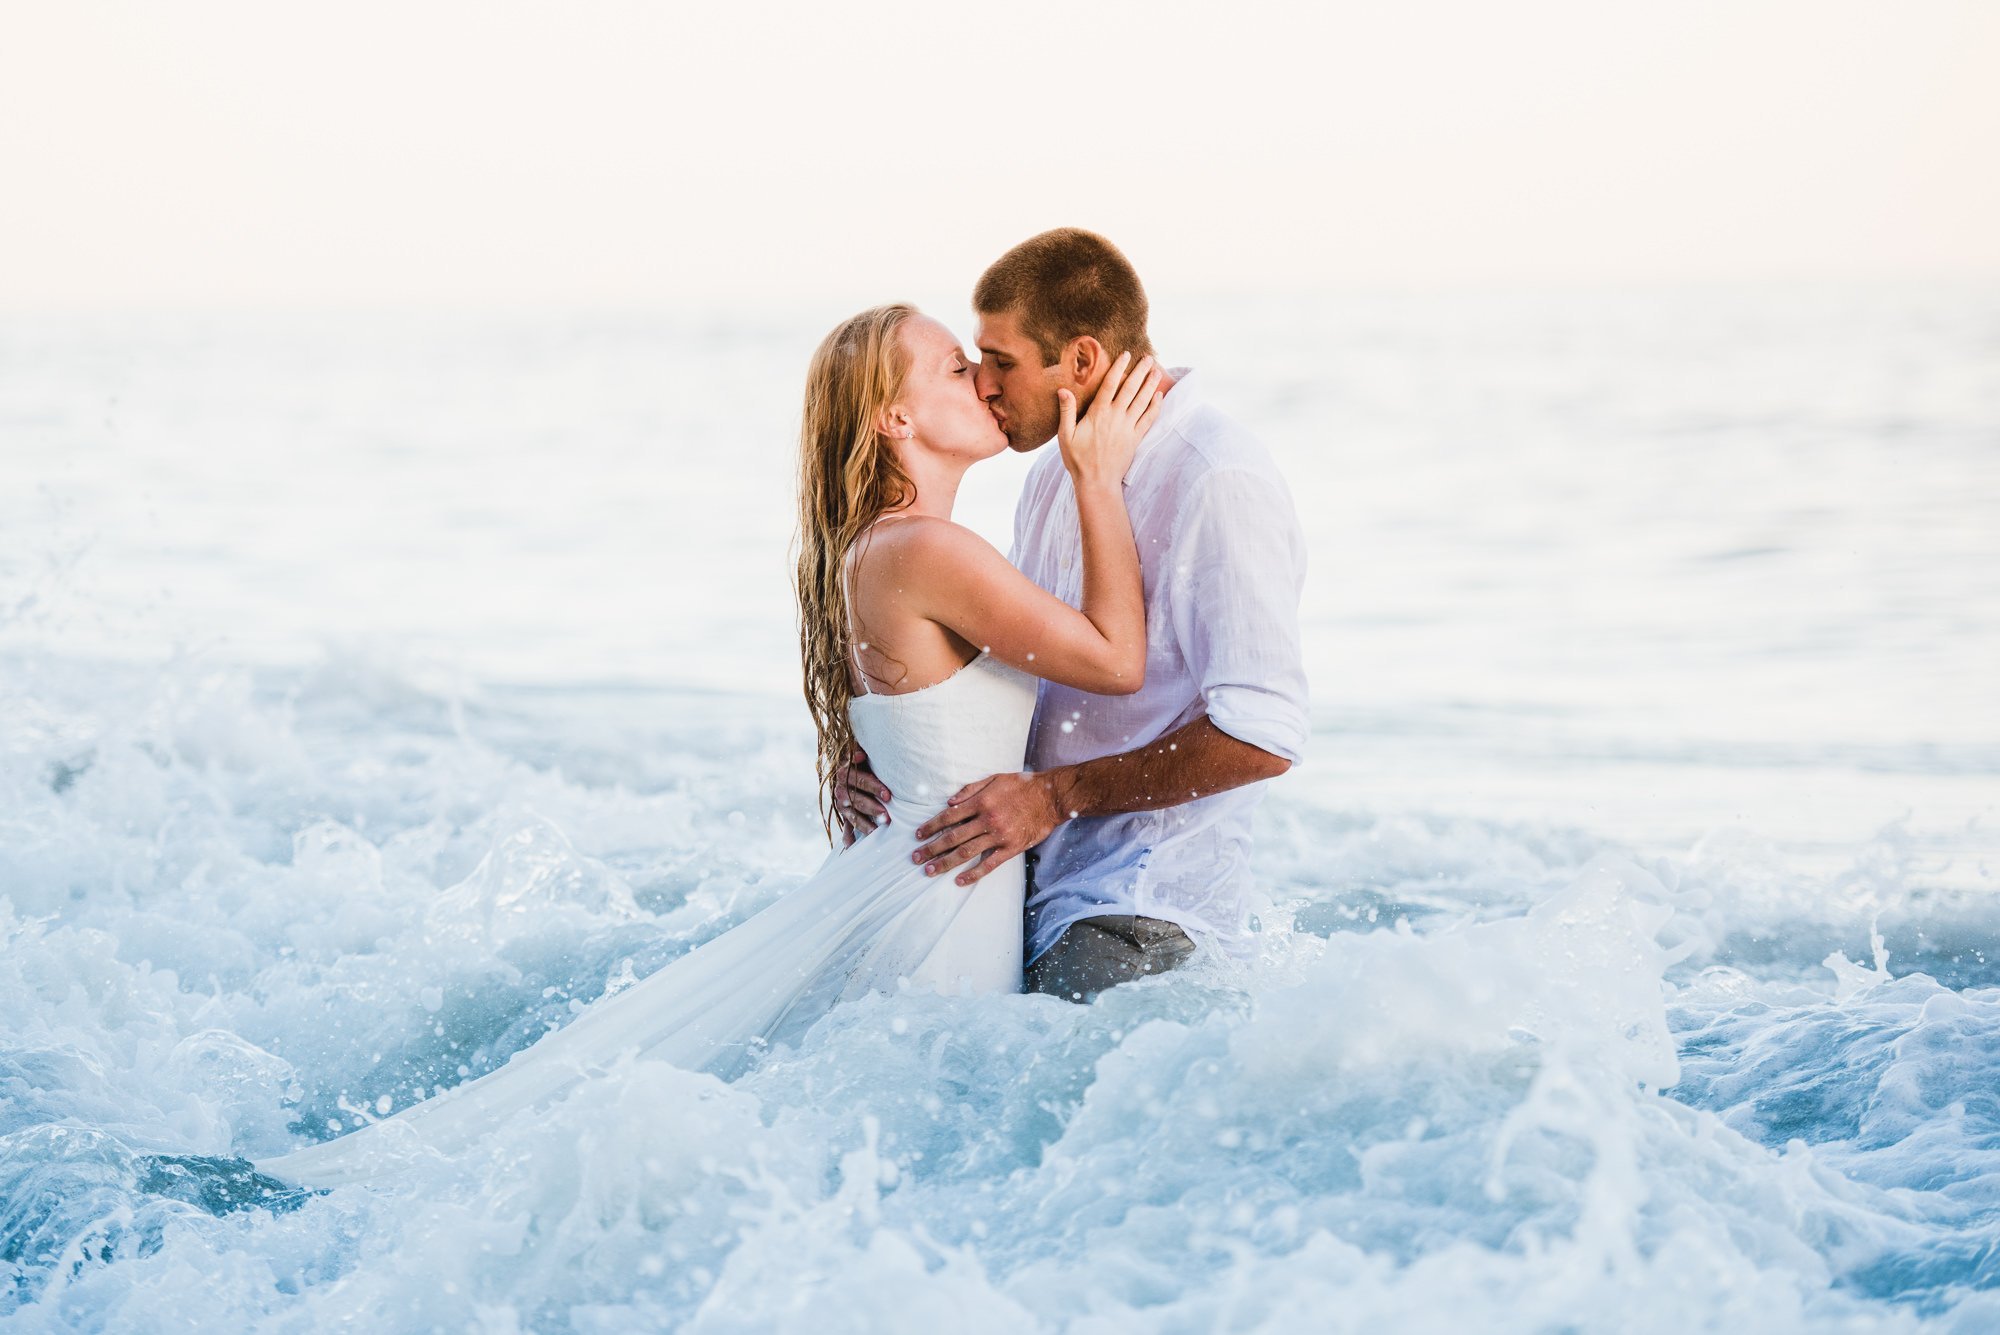 www.santabarbarawedding.com | Grace Kathryn Photography | Couple Kissing in the Waves at Engagement Shoot